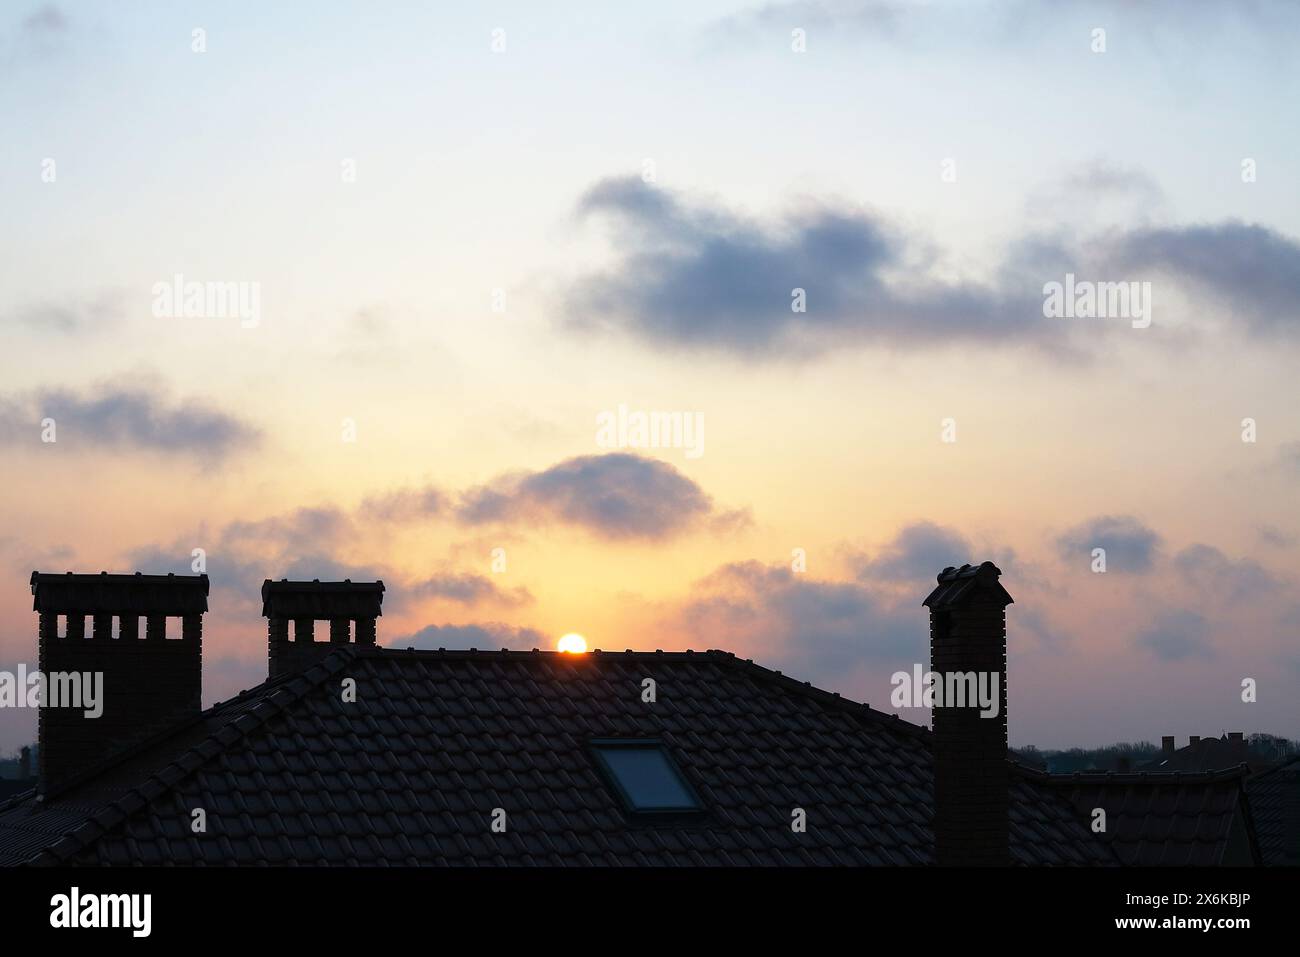 Chimneys, tiled roof of a house and beautiful clouds in the haze at sunset Stock Photo